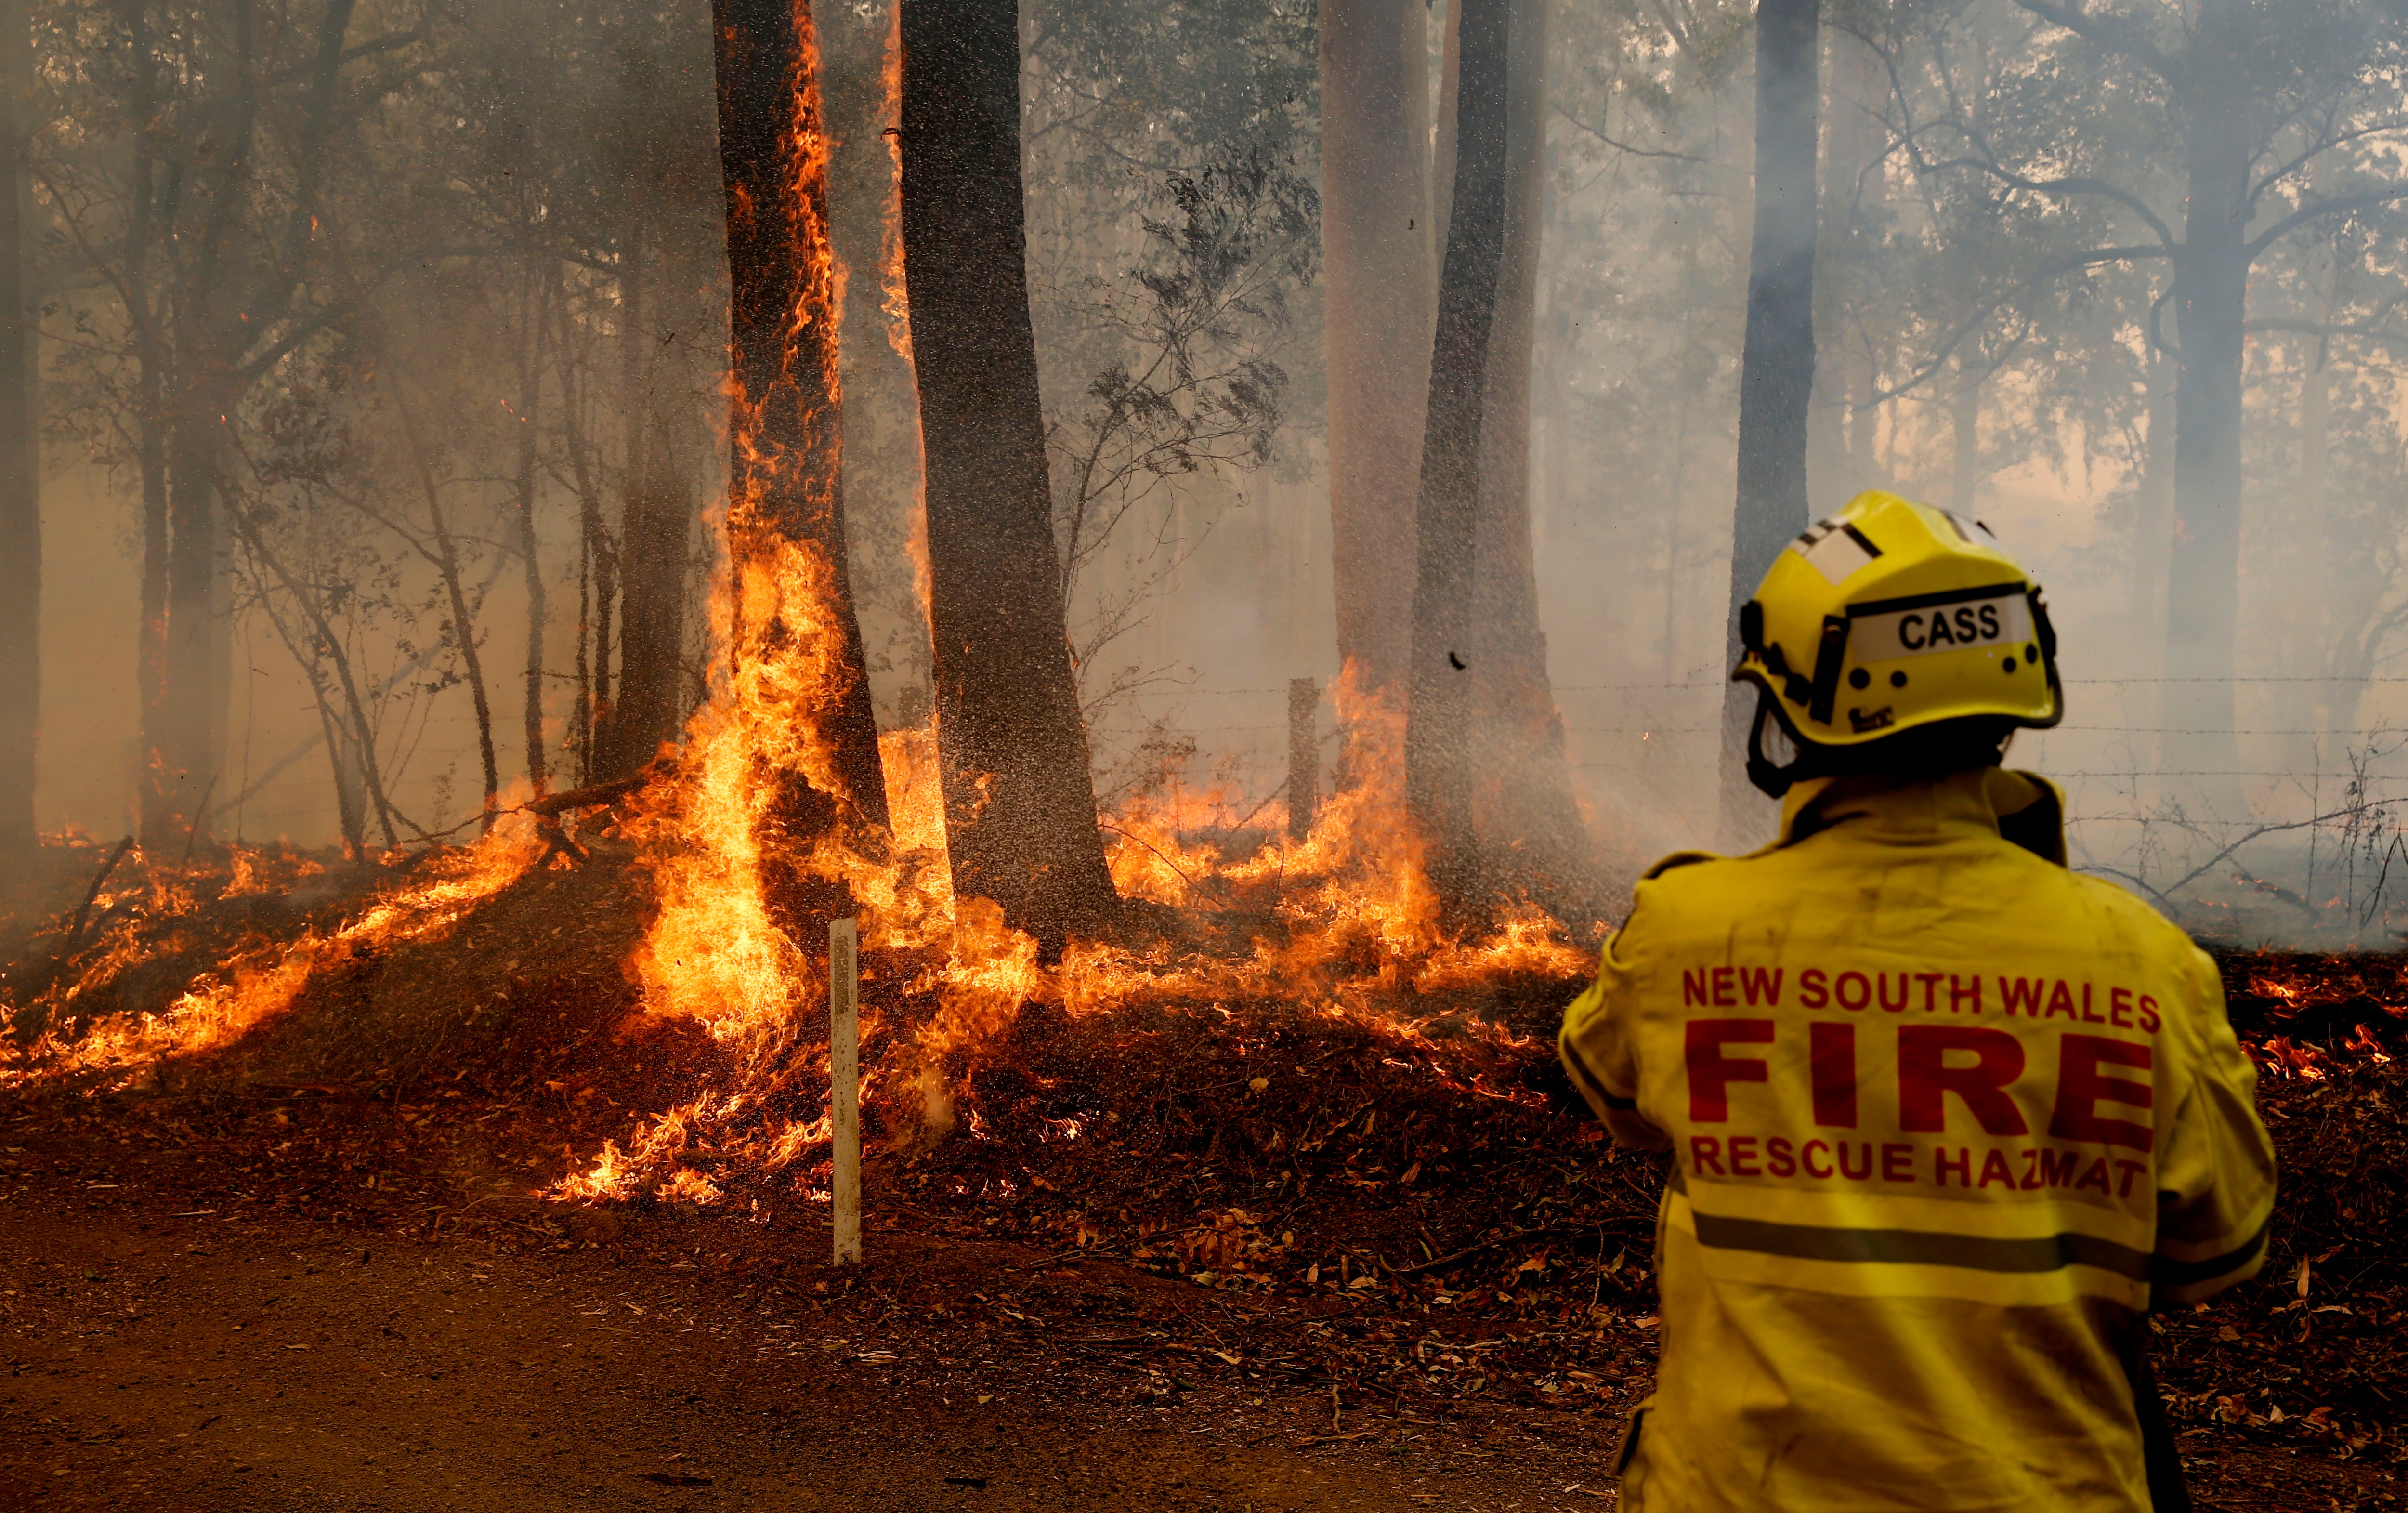 A Gloucester firefighter battles flames at Koorainghat, near Taree on NSW's mid-north coast.